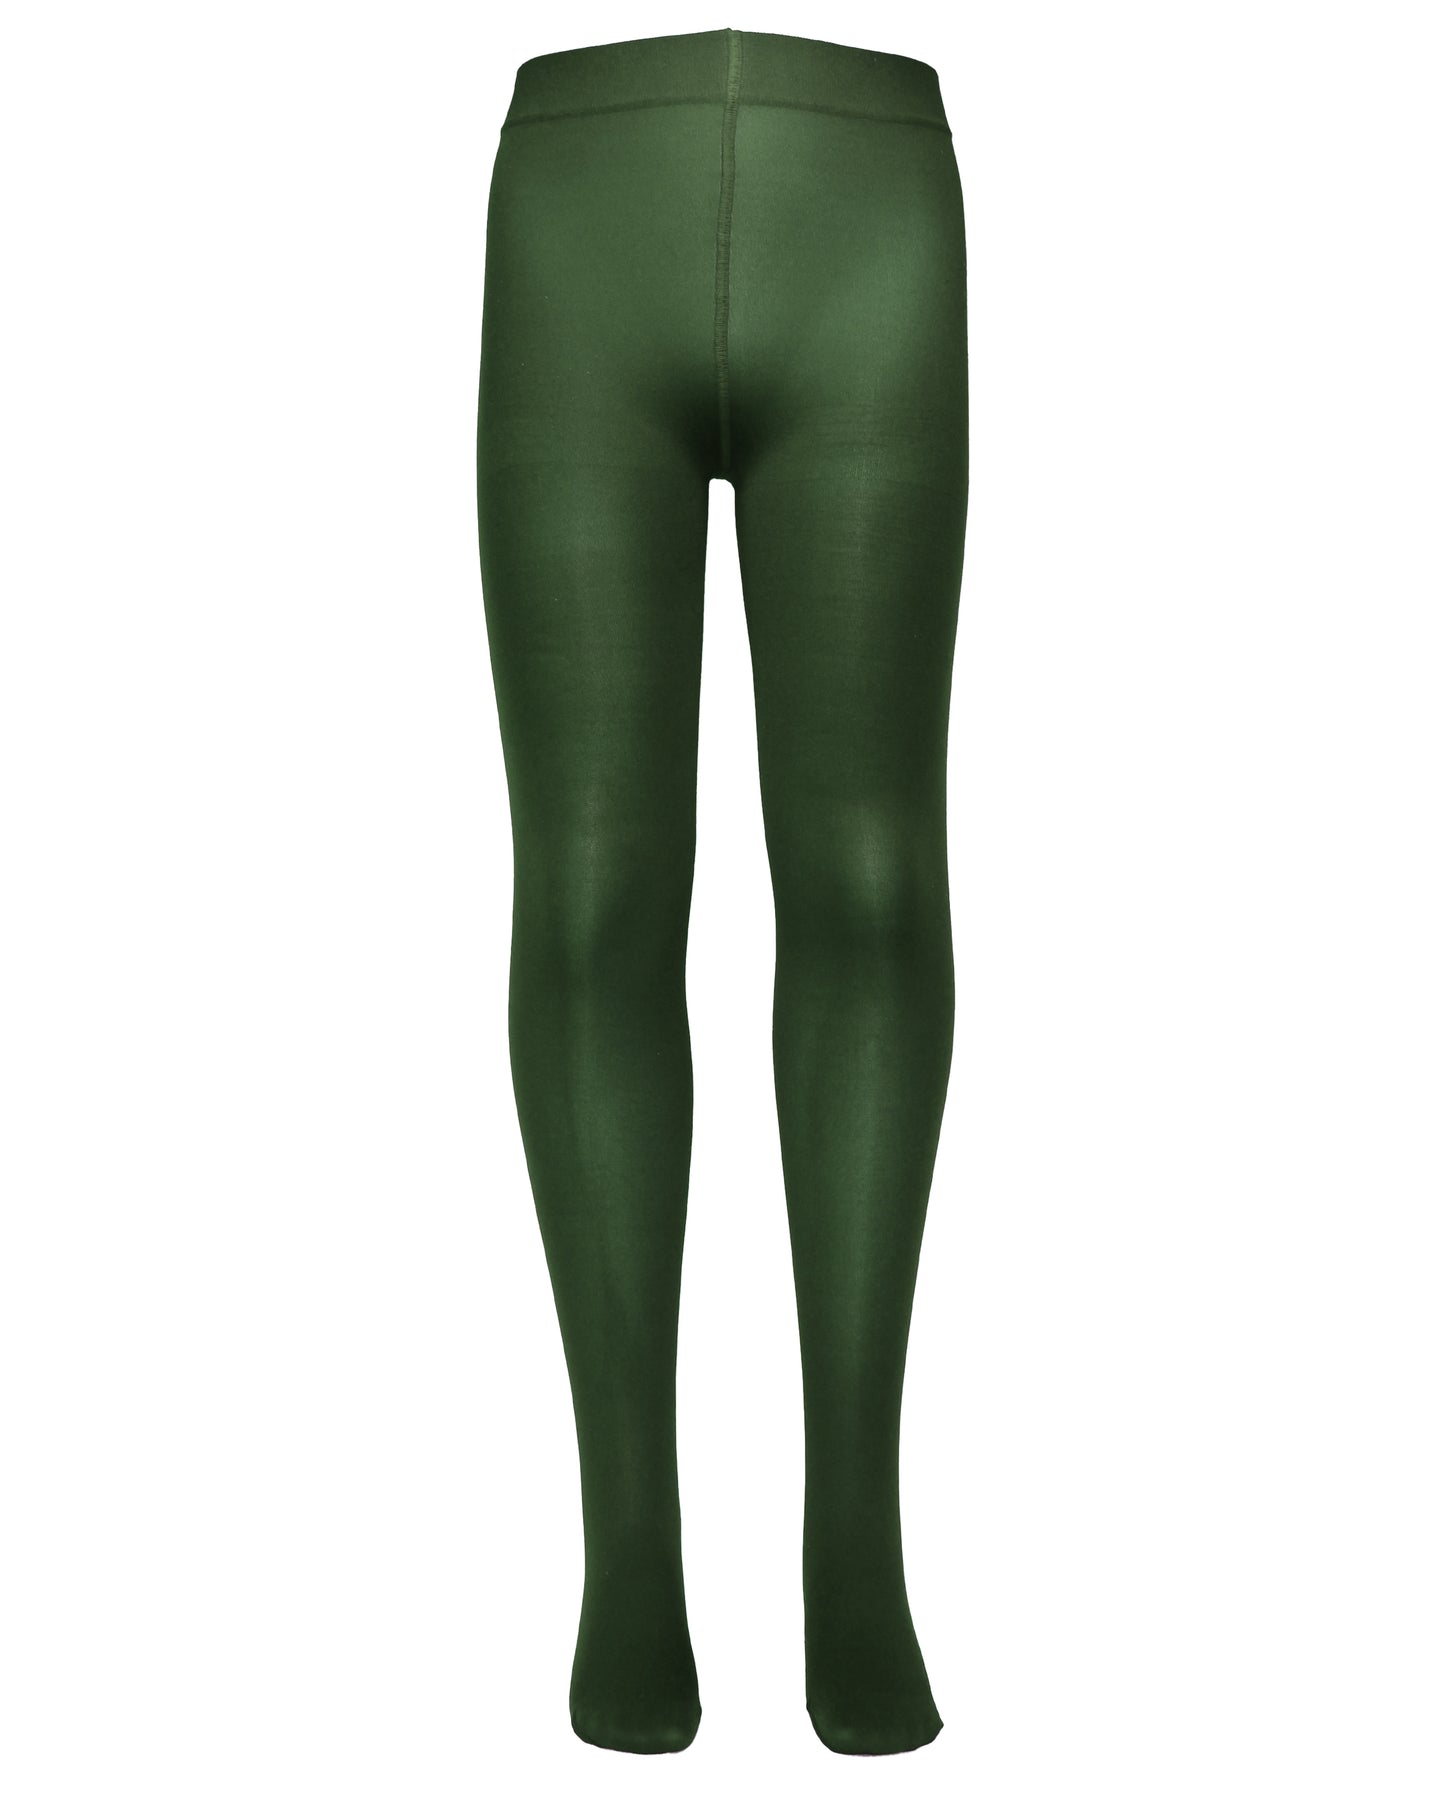 Omsa MiniVelour 40 Tights - Dark bottle green soft and matte opaque plain kid's tights with flat seams, deep waistband and reinforced toes.